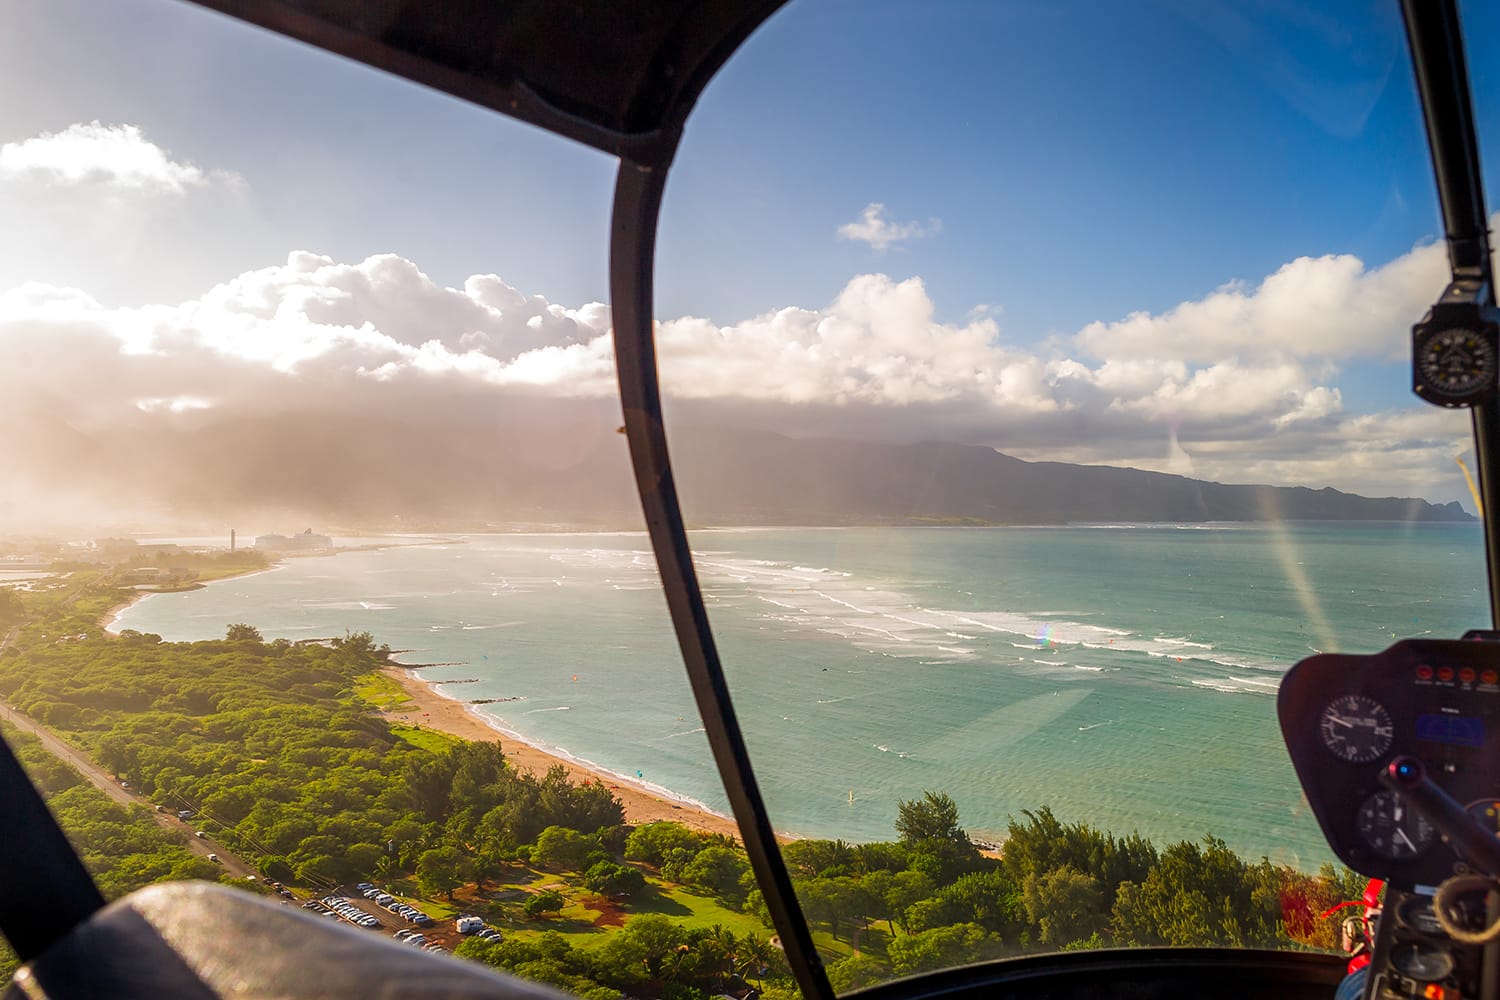 Helicopter ride of Maui's landscape